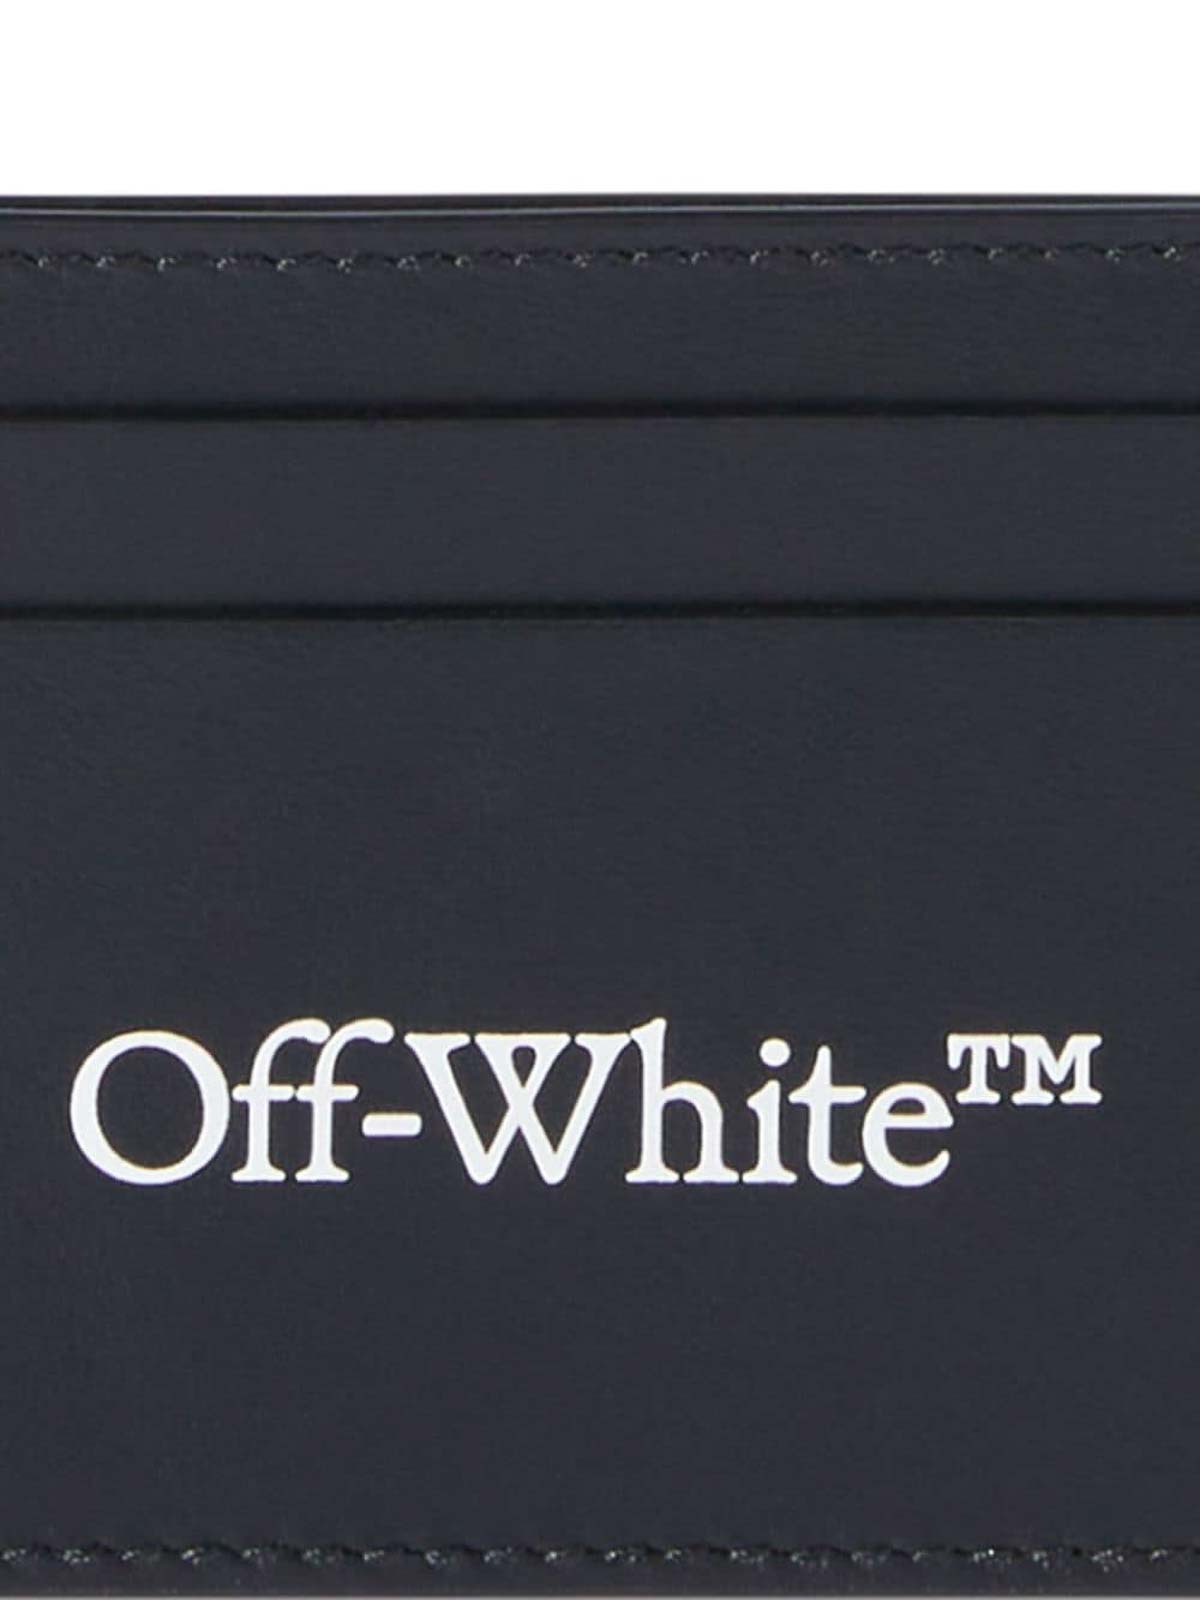 Shop Off-white Bookish Logo-print Leather Cardholder In Black